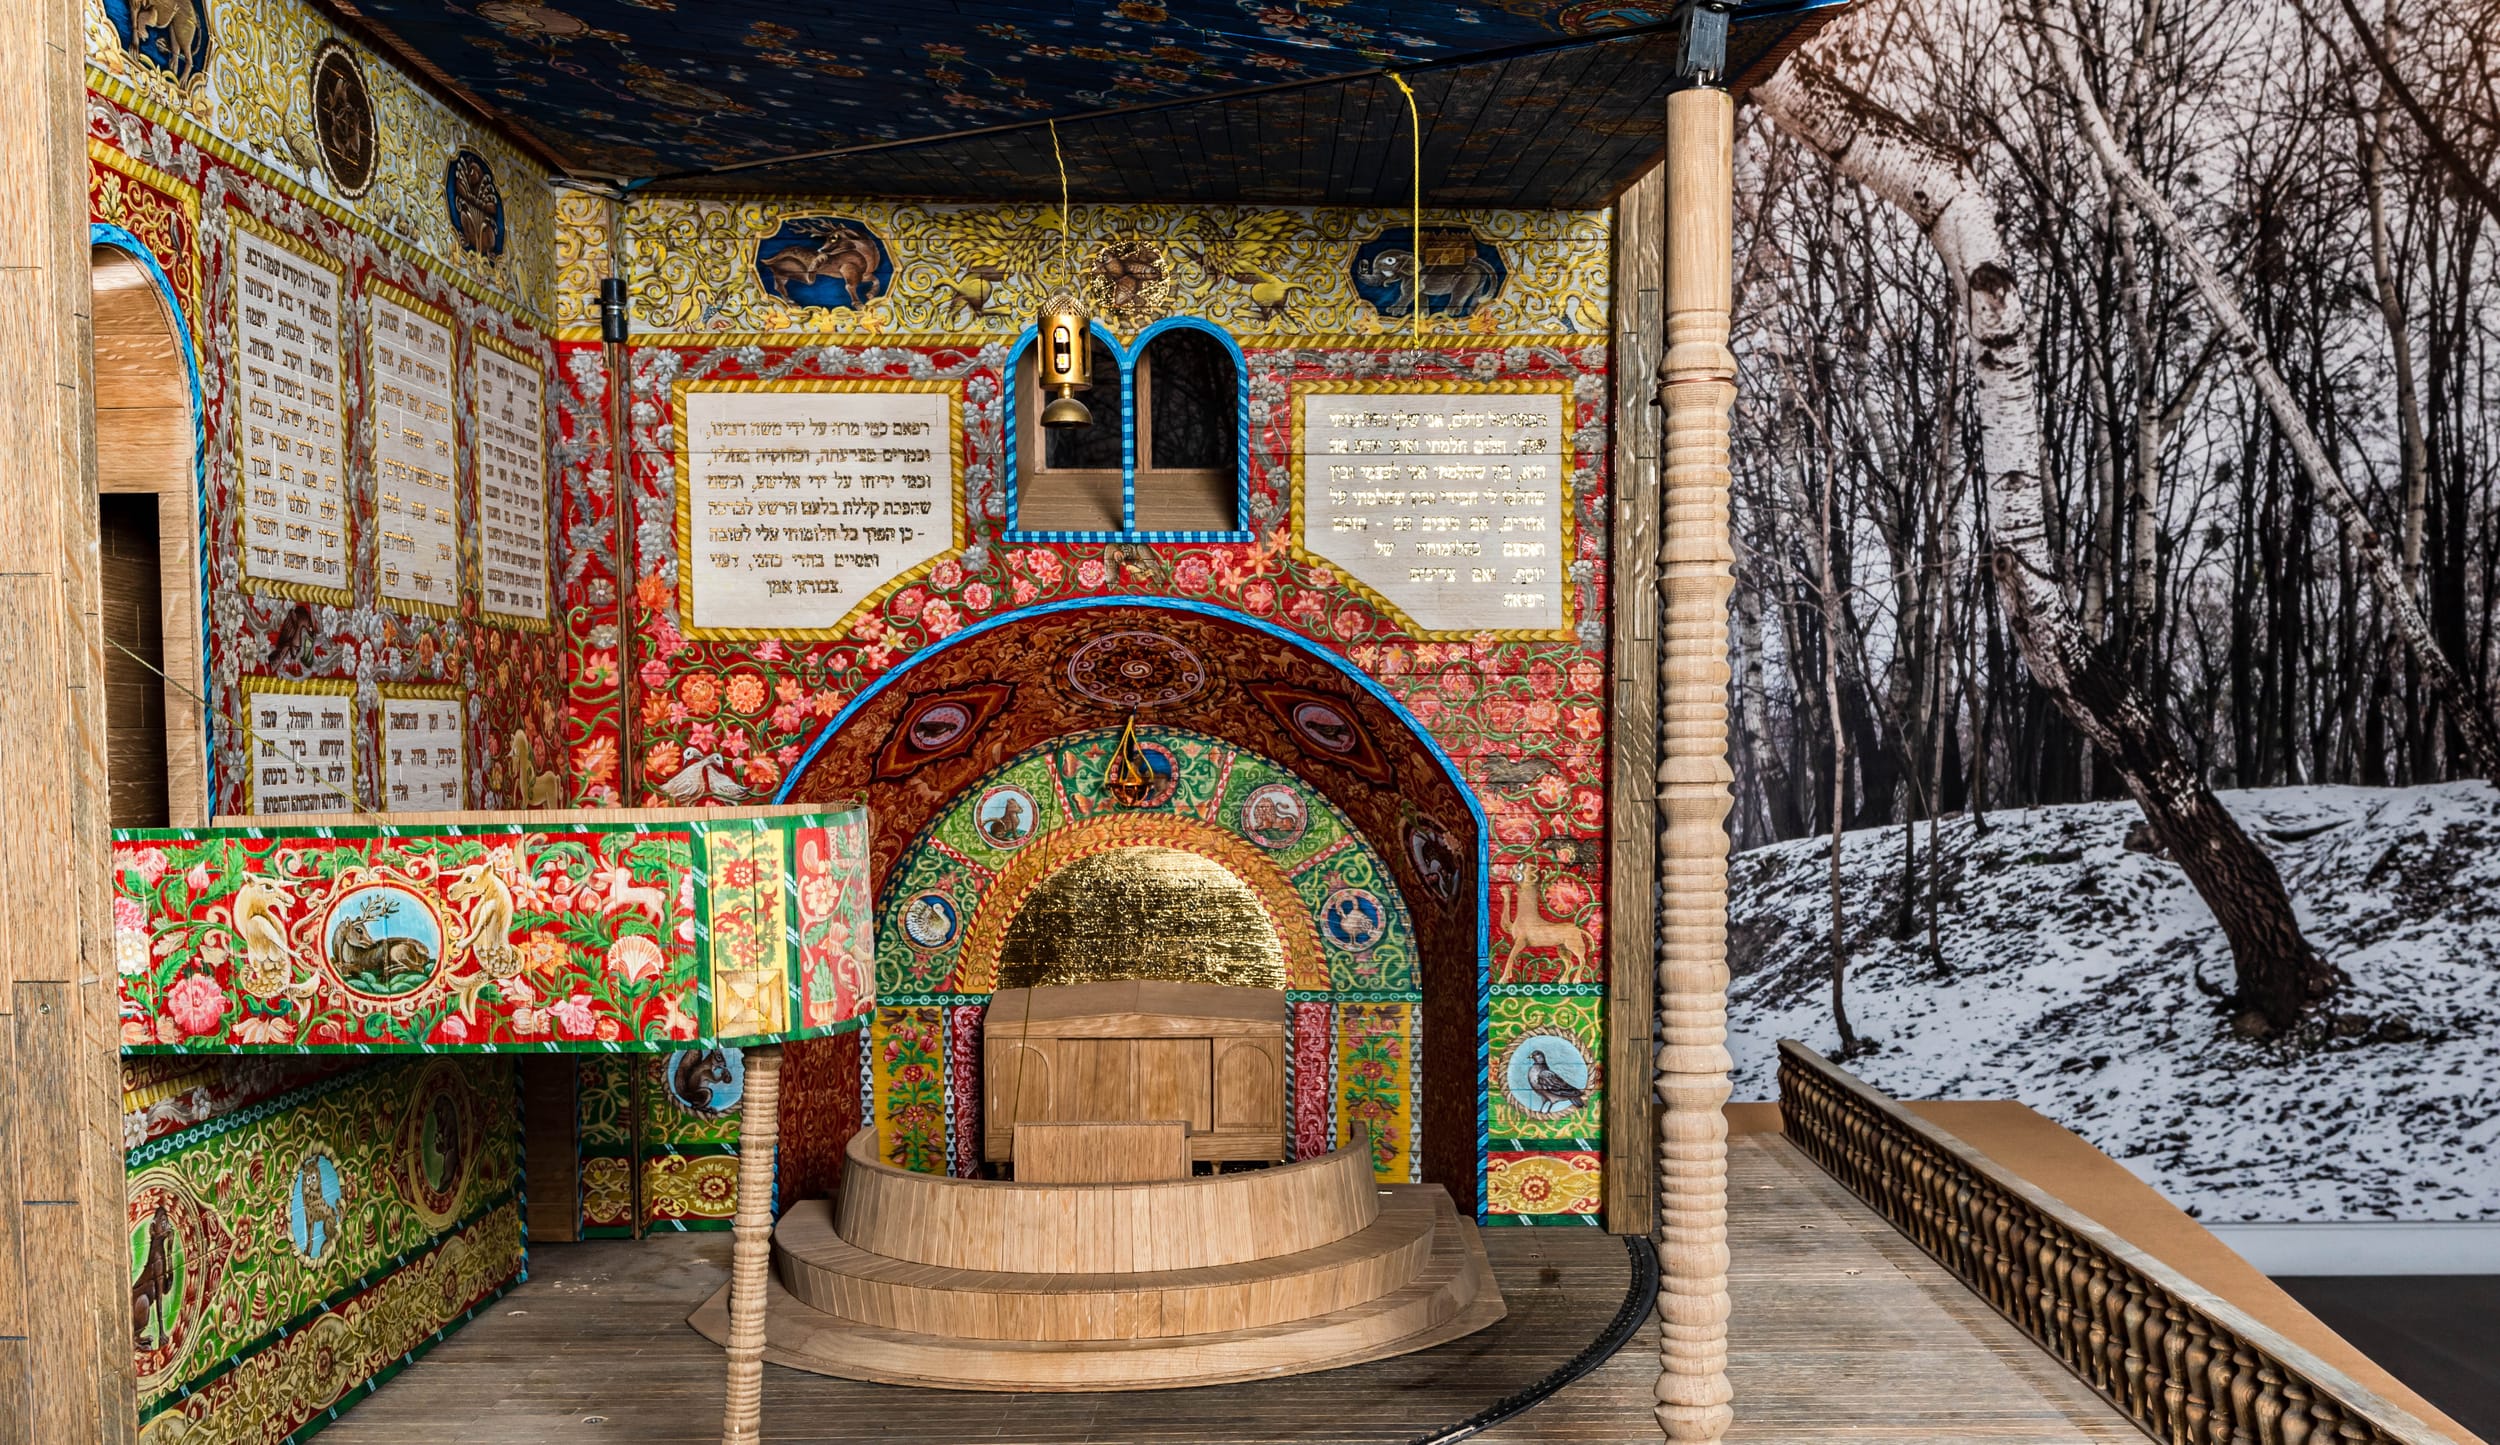 More a Book than an Ocean of Concrete: How to Tell the Story of the Babyn Yar Synagogue